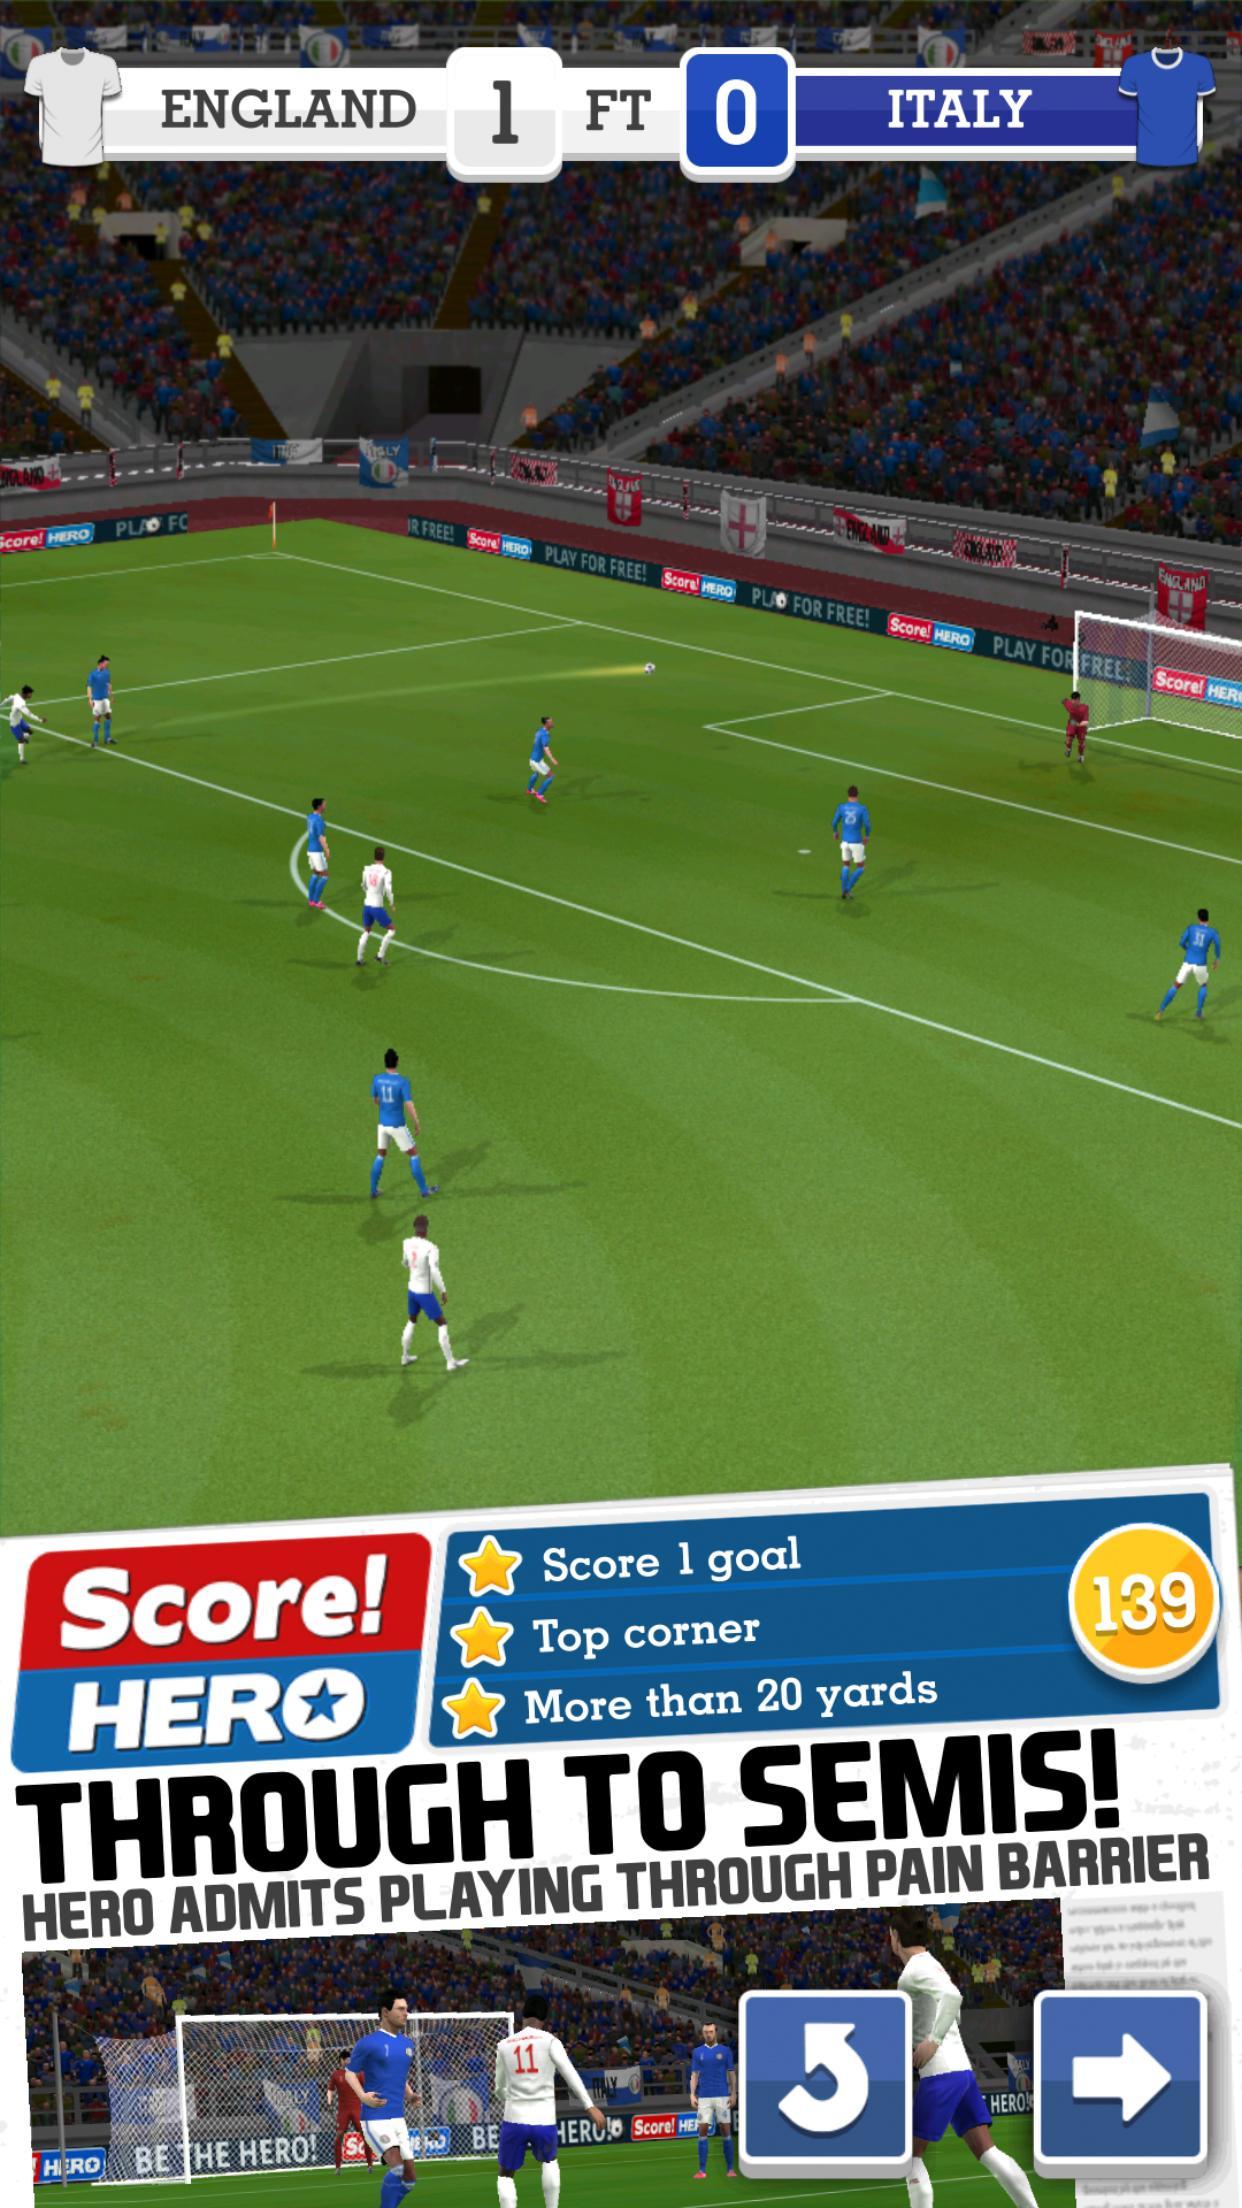 Score! Hero For Android - Apk Download